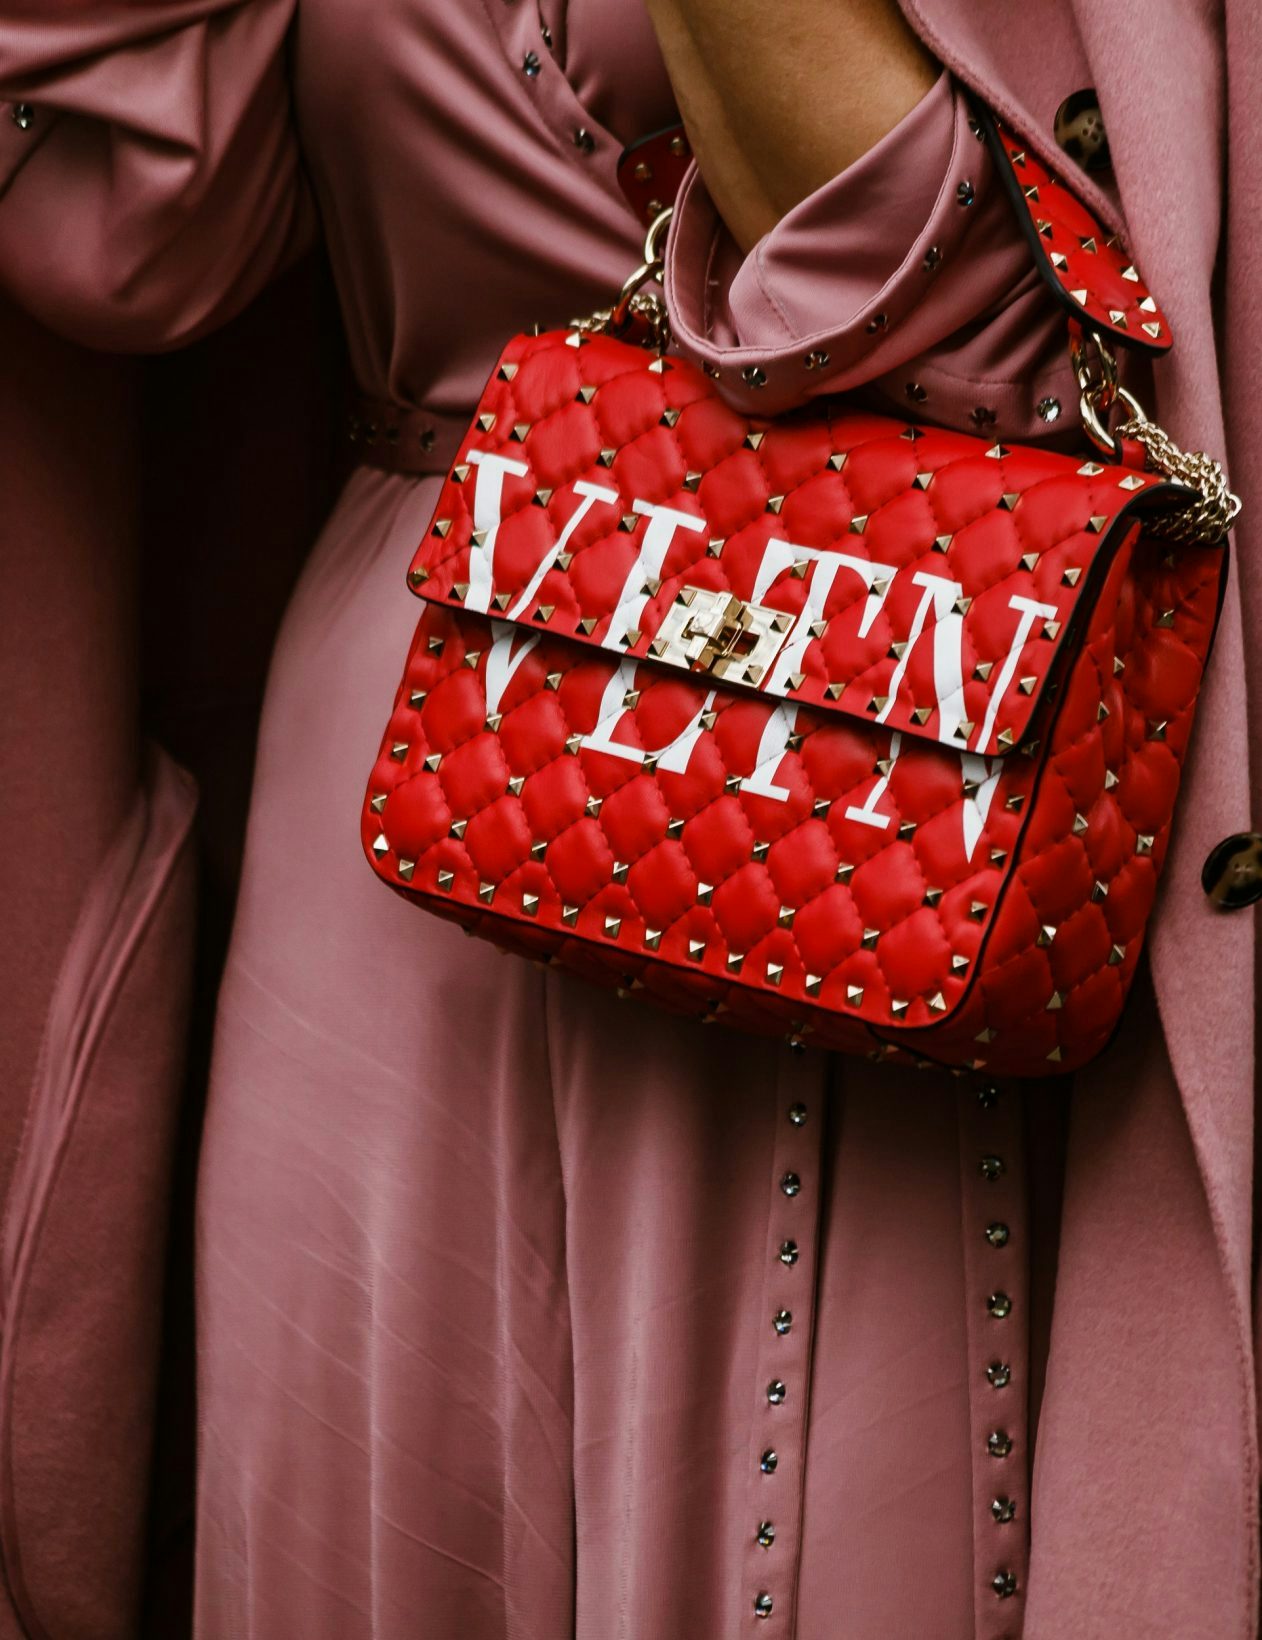 Fashion meets literature with the “Valentino Narratives II” initiative